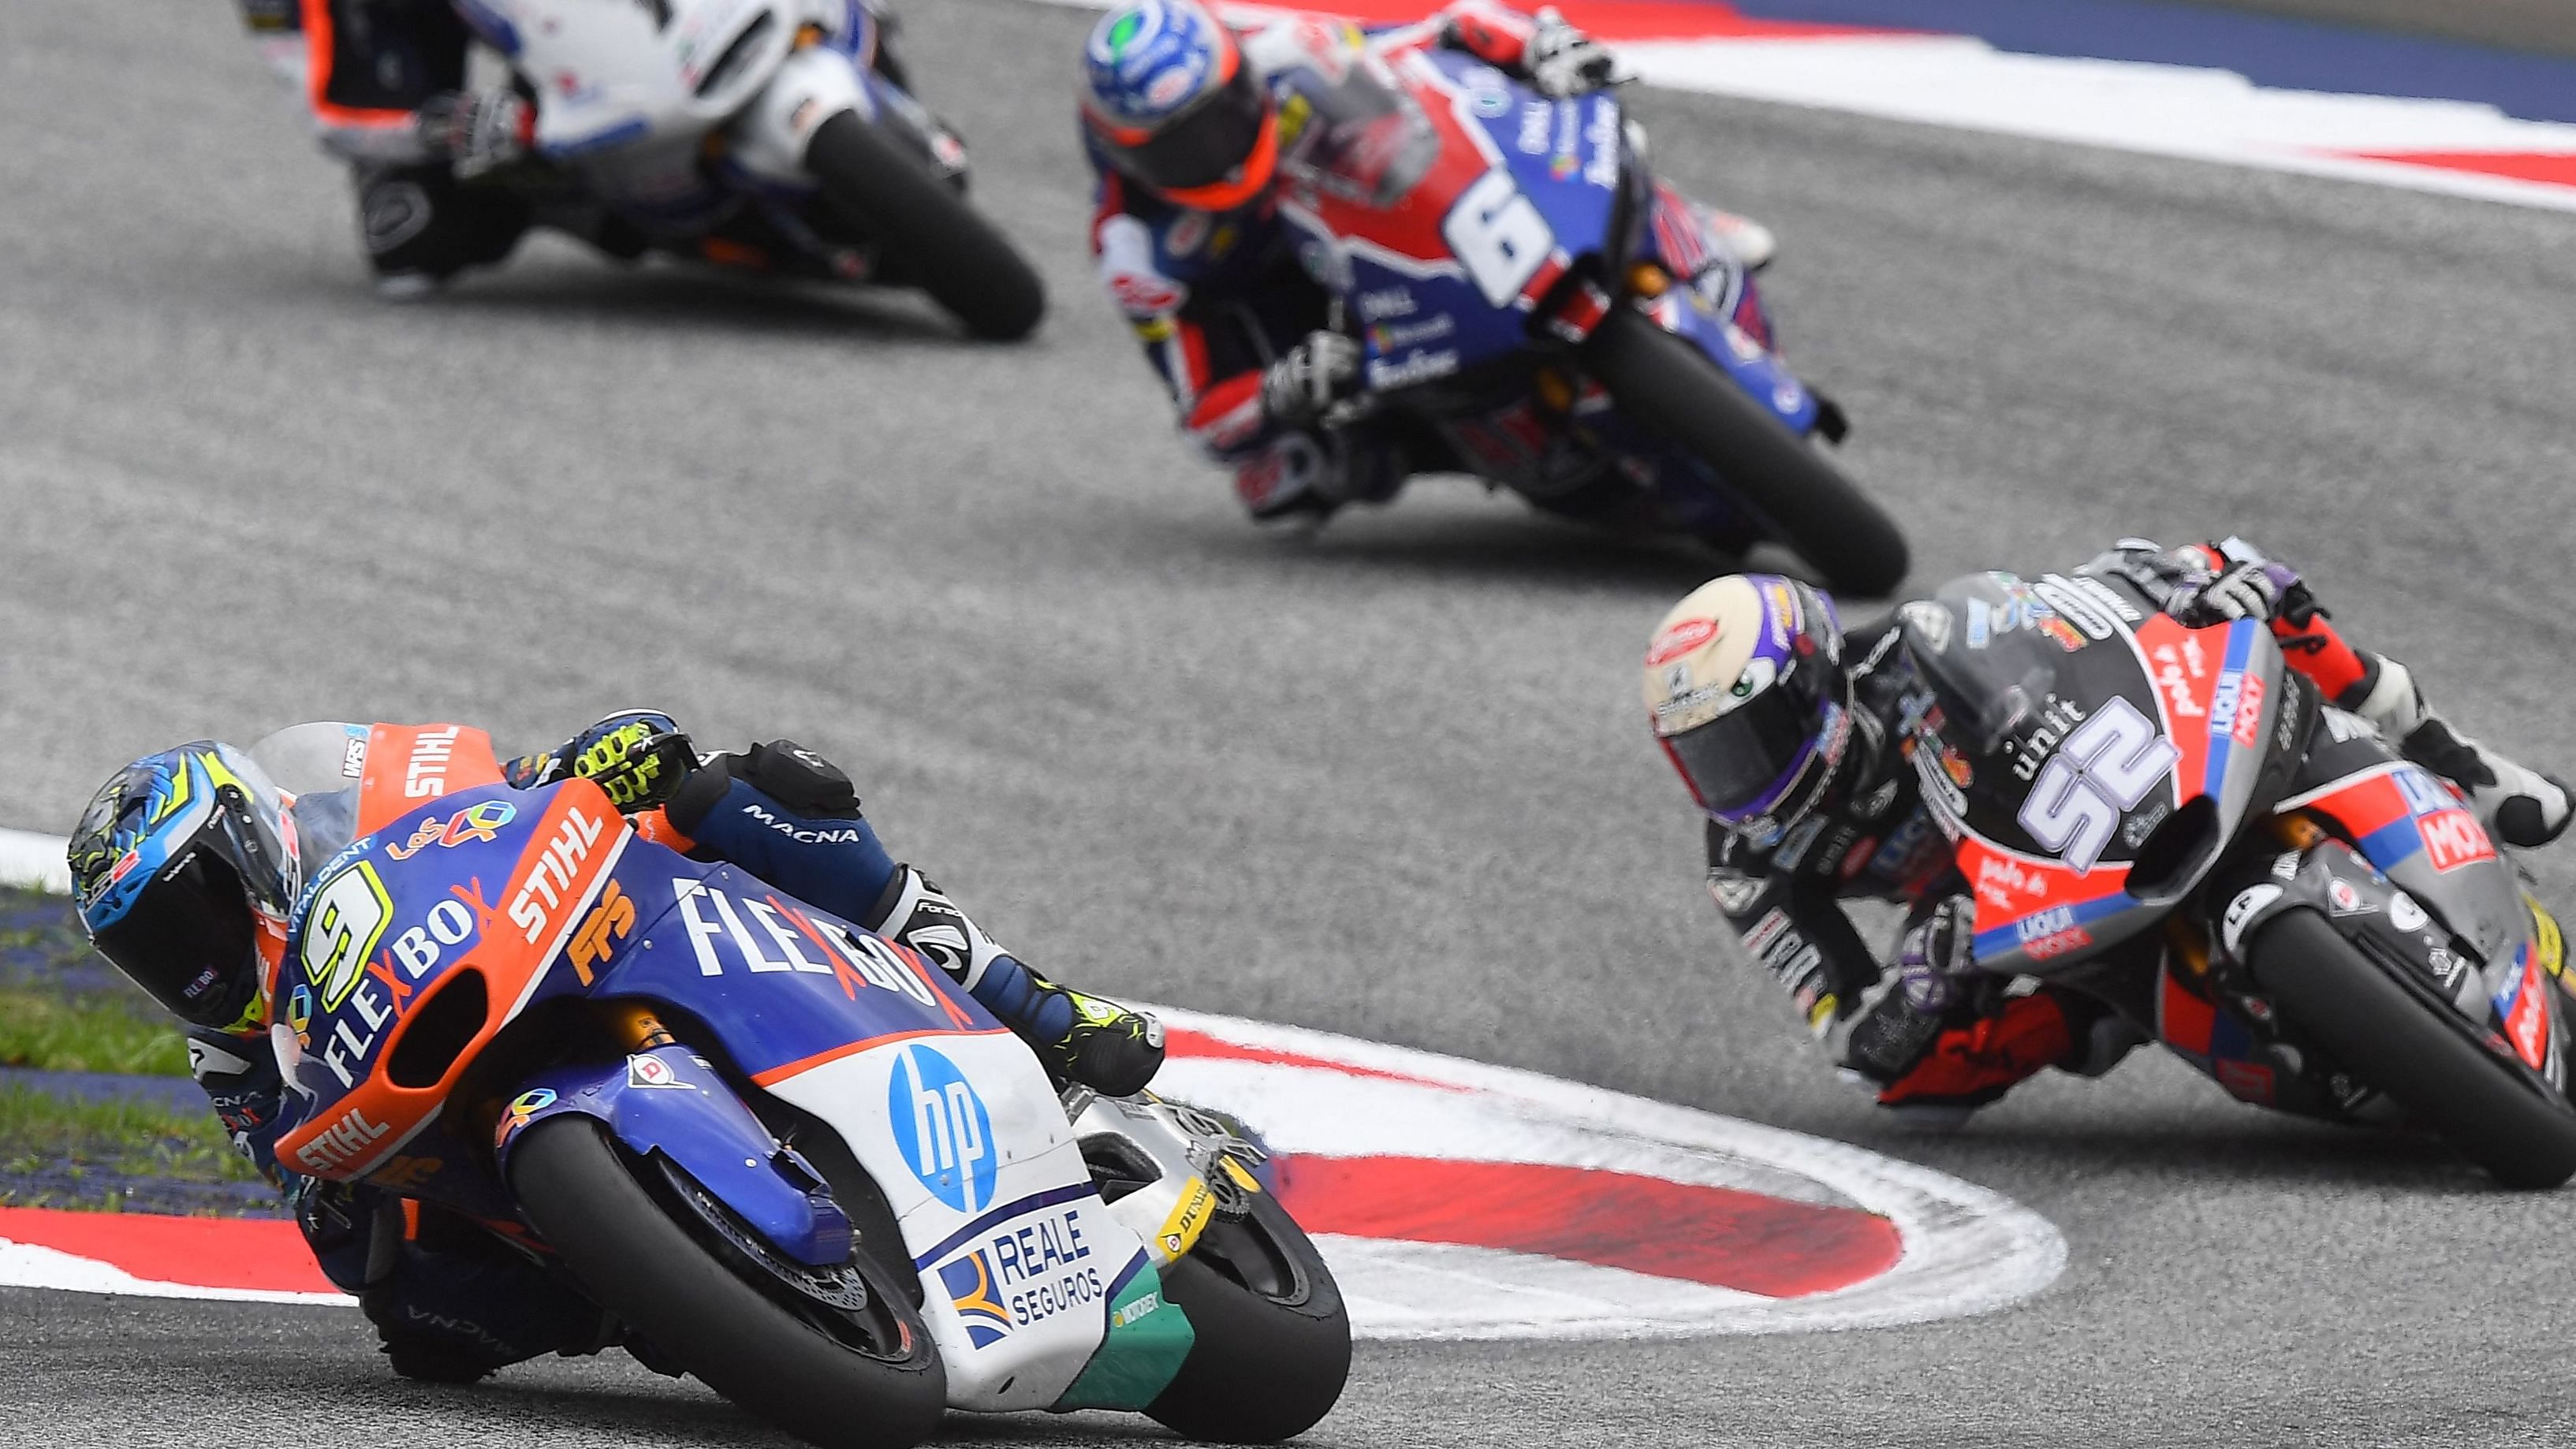 The FIM homologation of the track will be done only after the agreement is signed between MotoGP rights owner and race promoters. Credit: AFP Photo